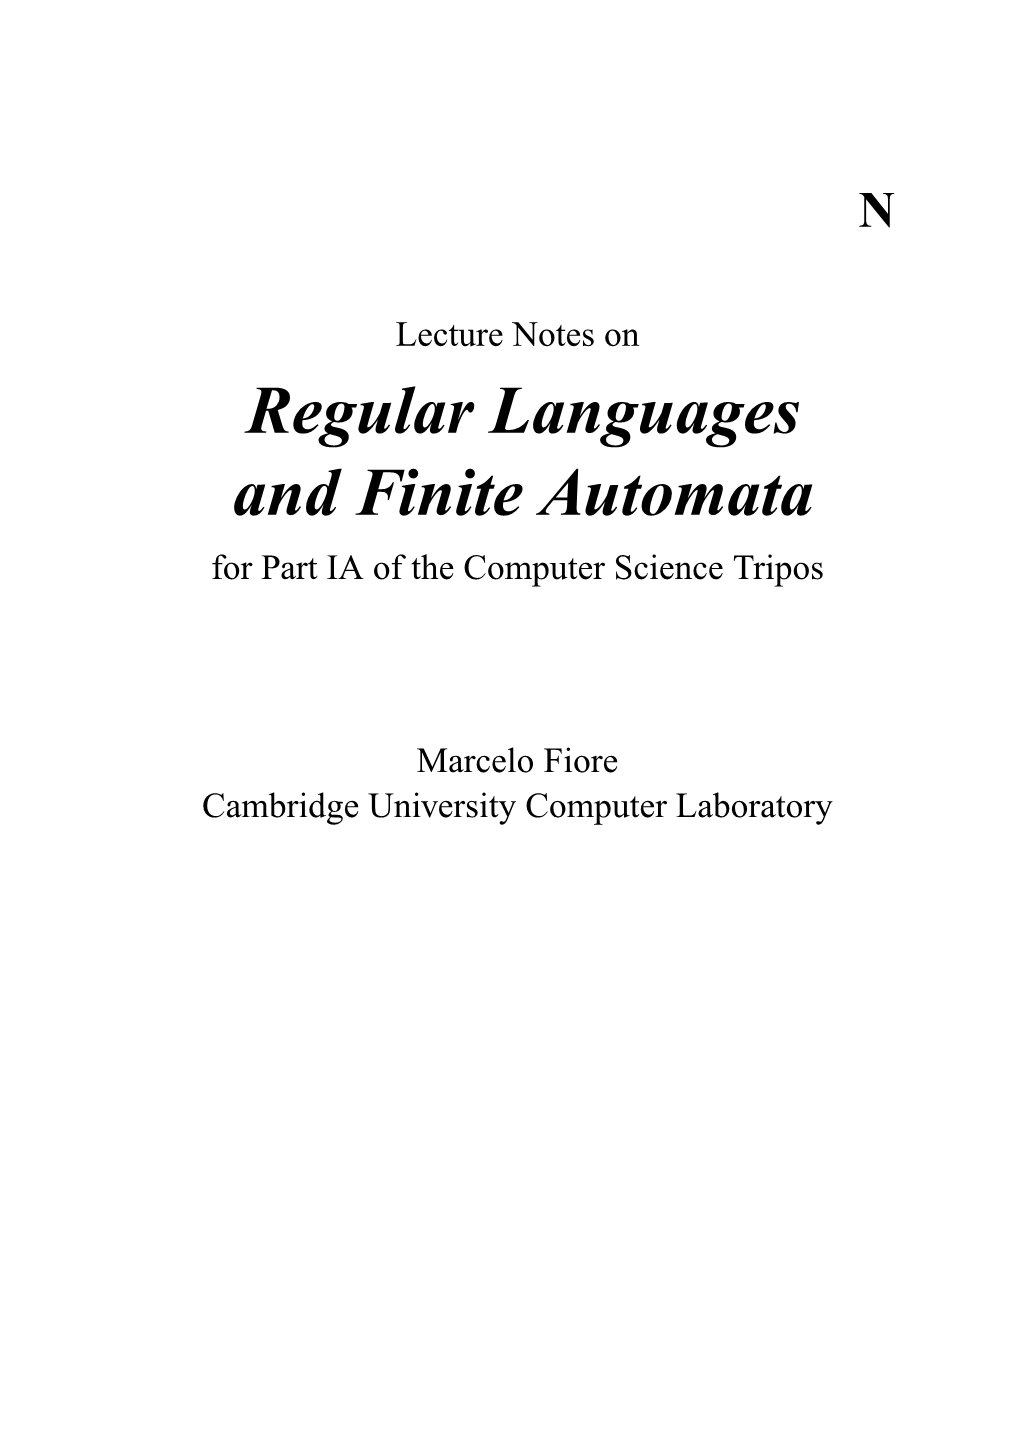 Regular Languages and Finite Automata for Part IA of the Computer Science Tripos